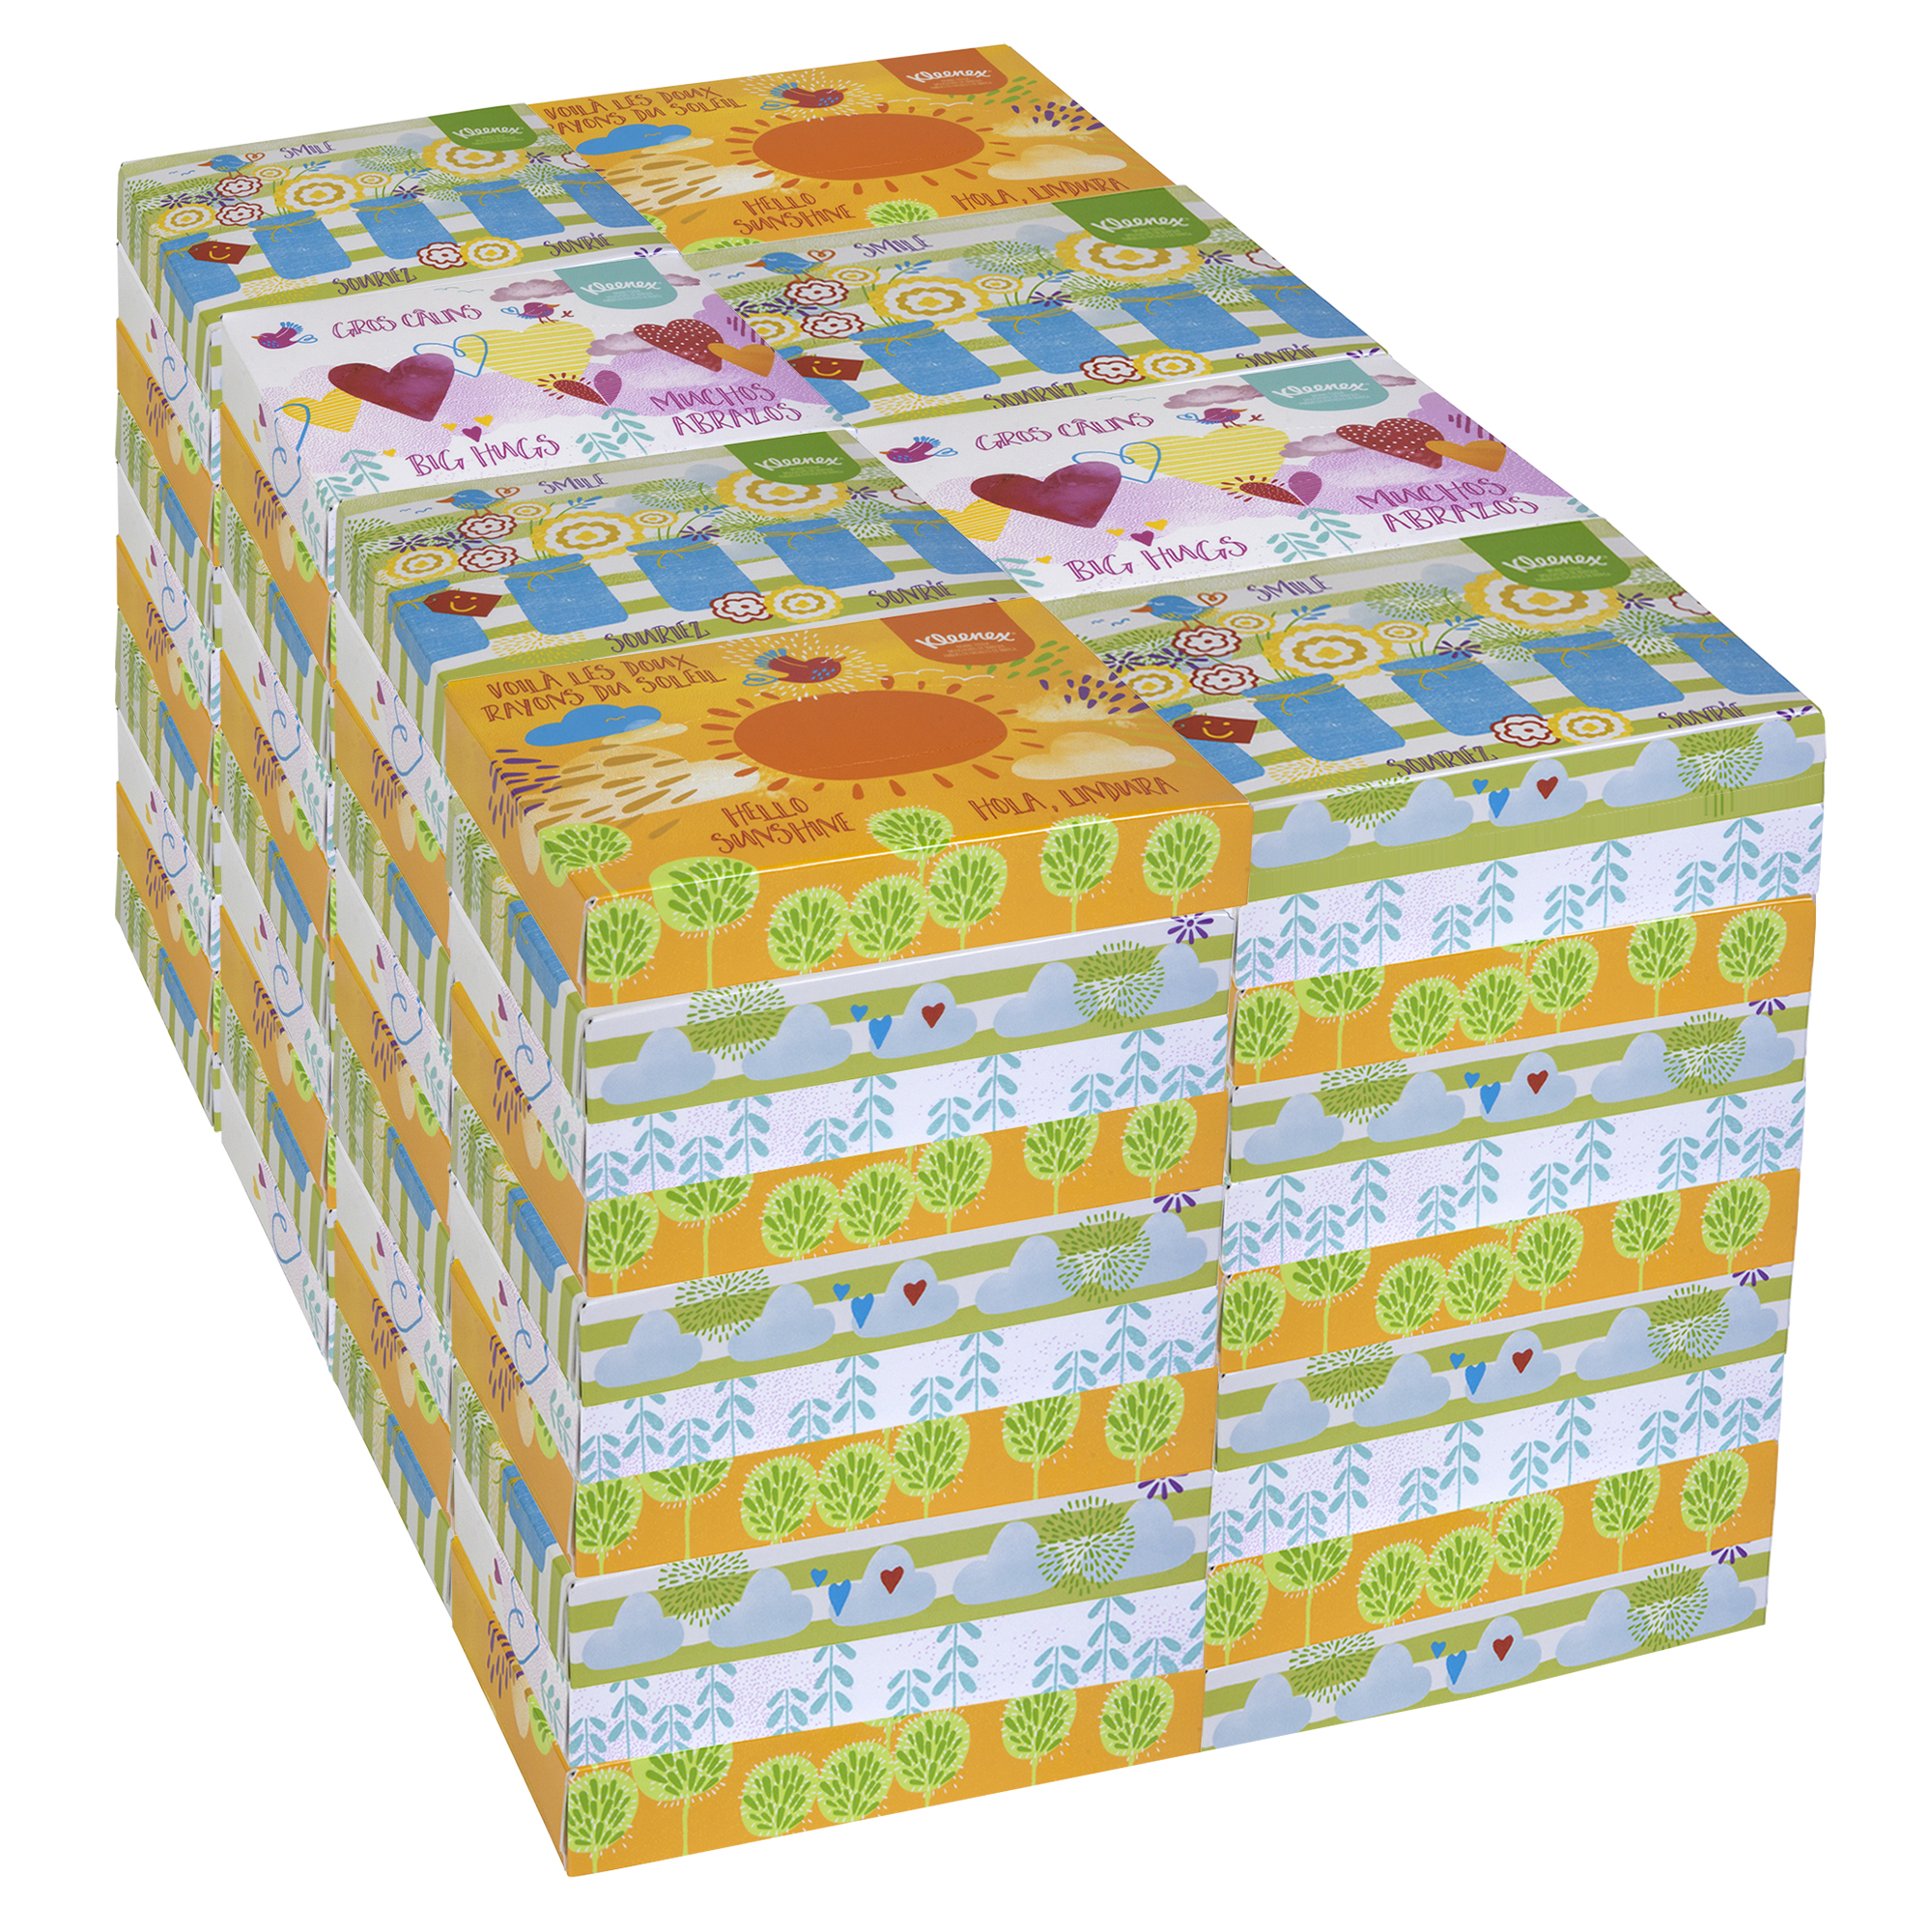 Picture of White Facial Tissue, 2-Ply, 65 Tissues/Box, 48 Boxes/Carton